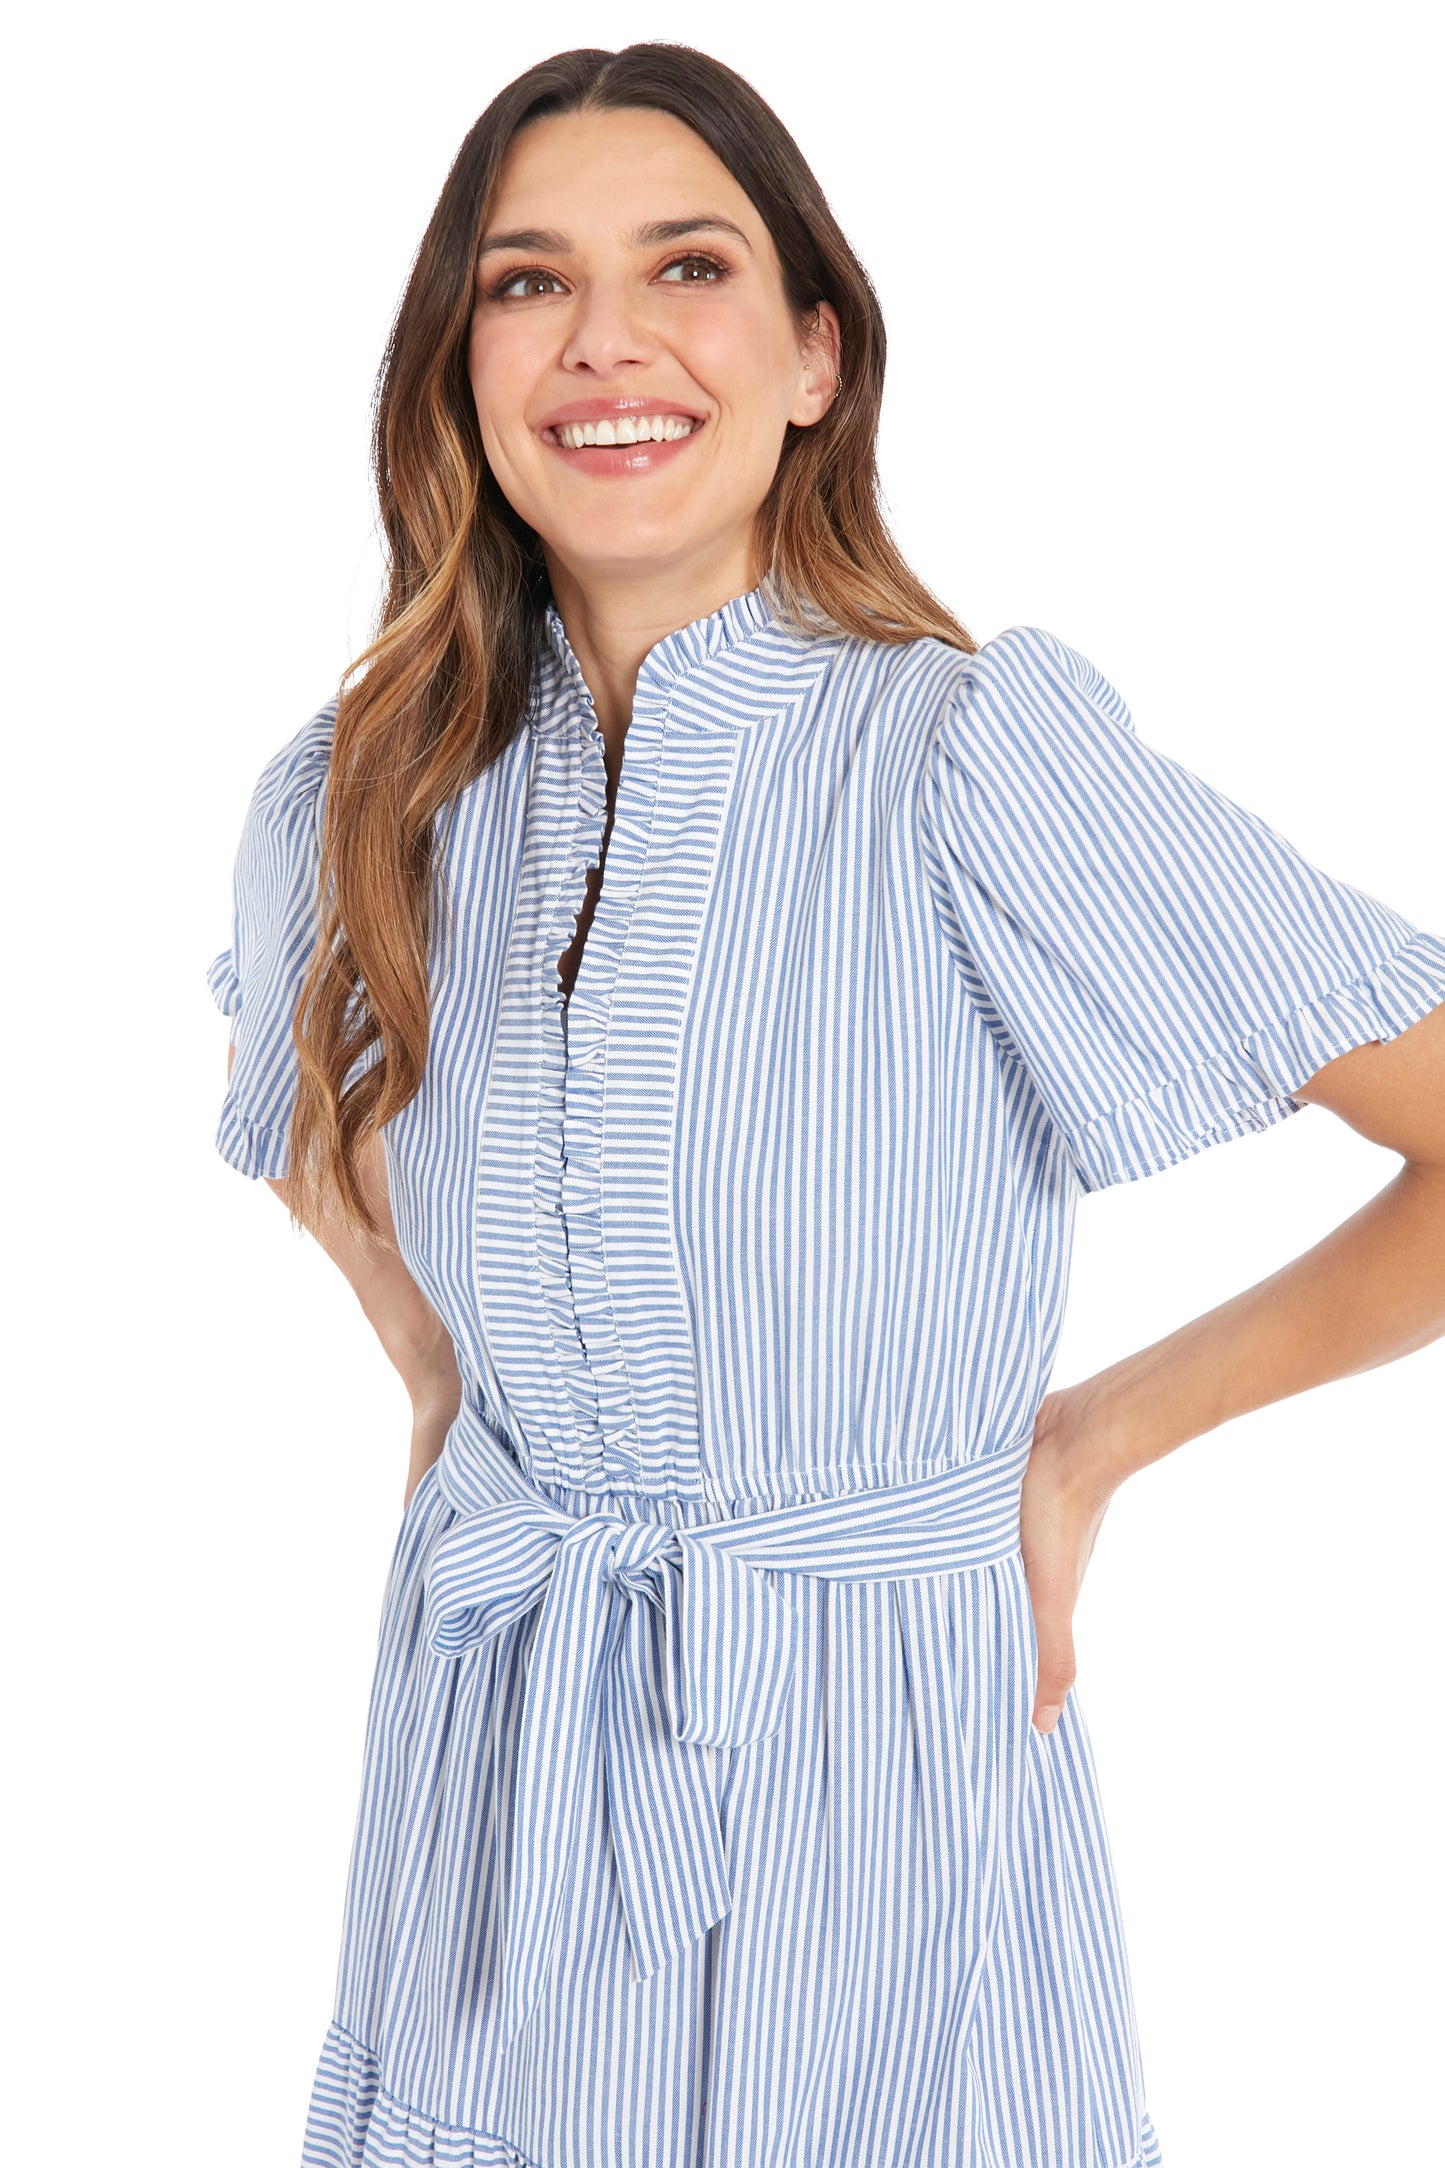 Tiered Stripe Maxi Dress with Sash Tie by London Times in Blue/White